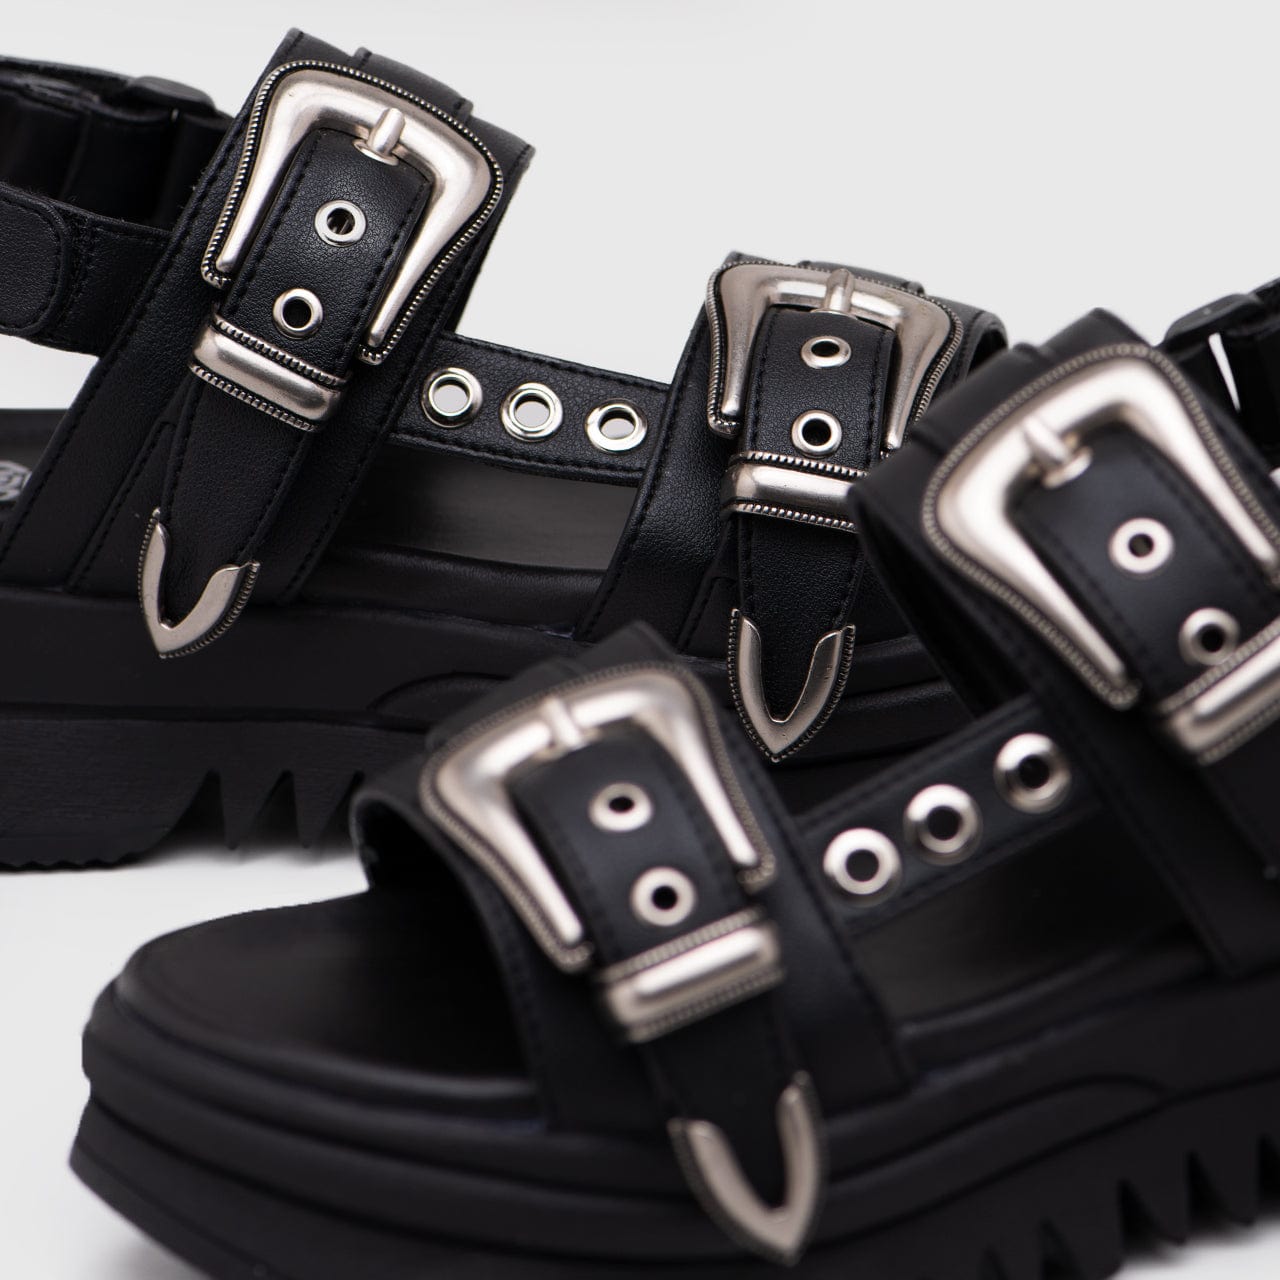 Adorable Projects Official Adorableprojects - Bowline Sandals Black - Sendal Wanita